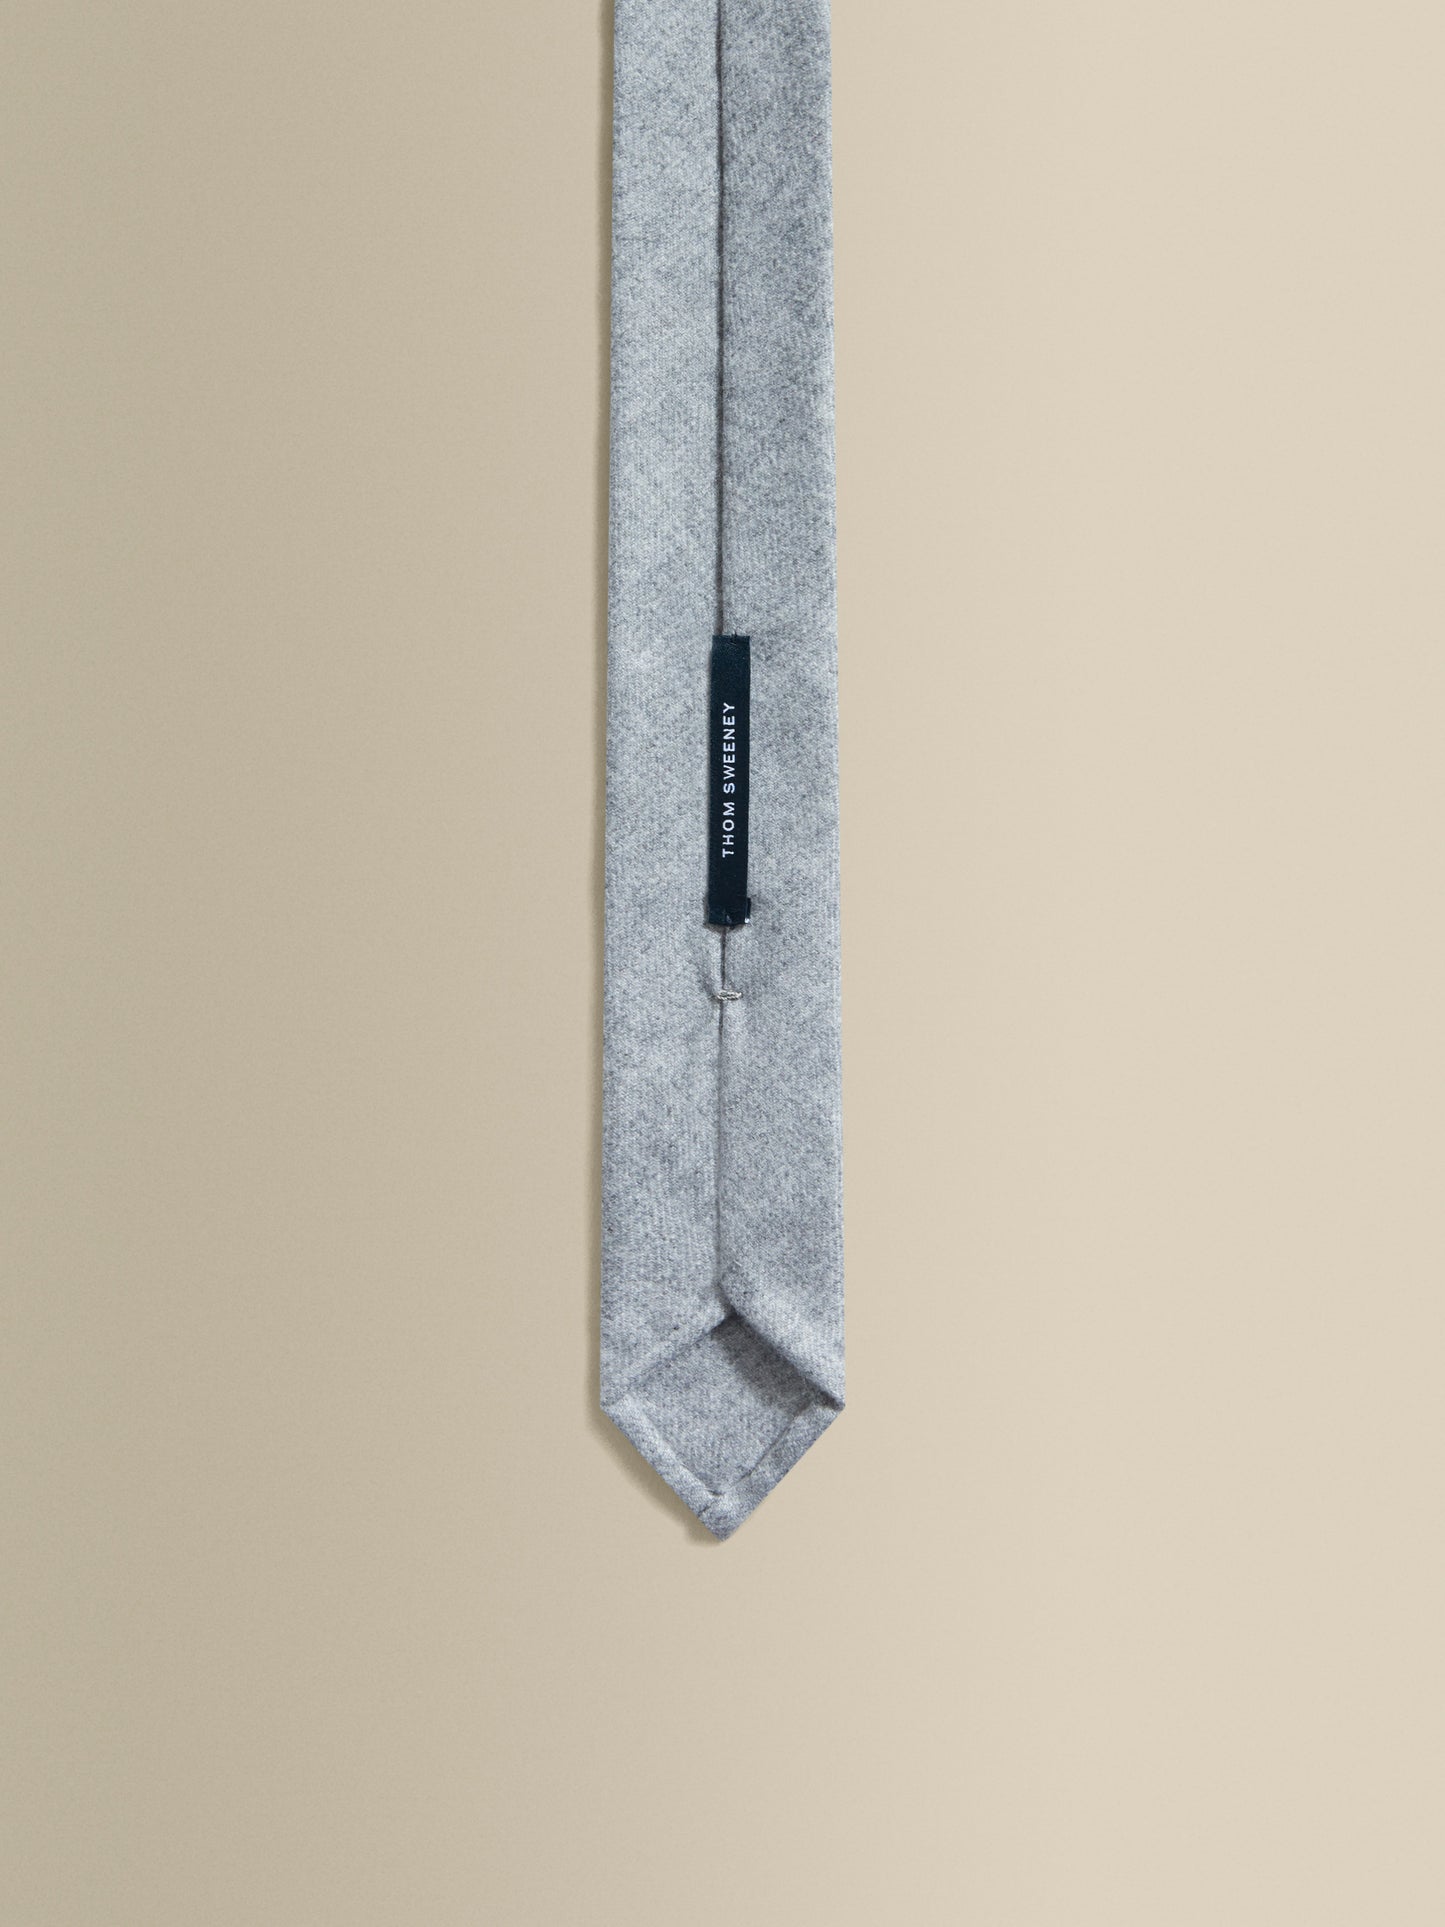 Cashmere Tie Grey Inside Label Product Image